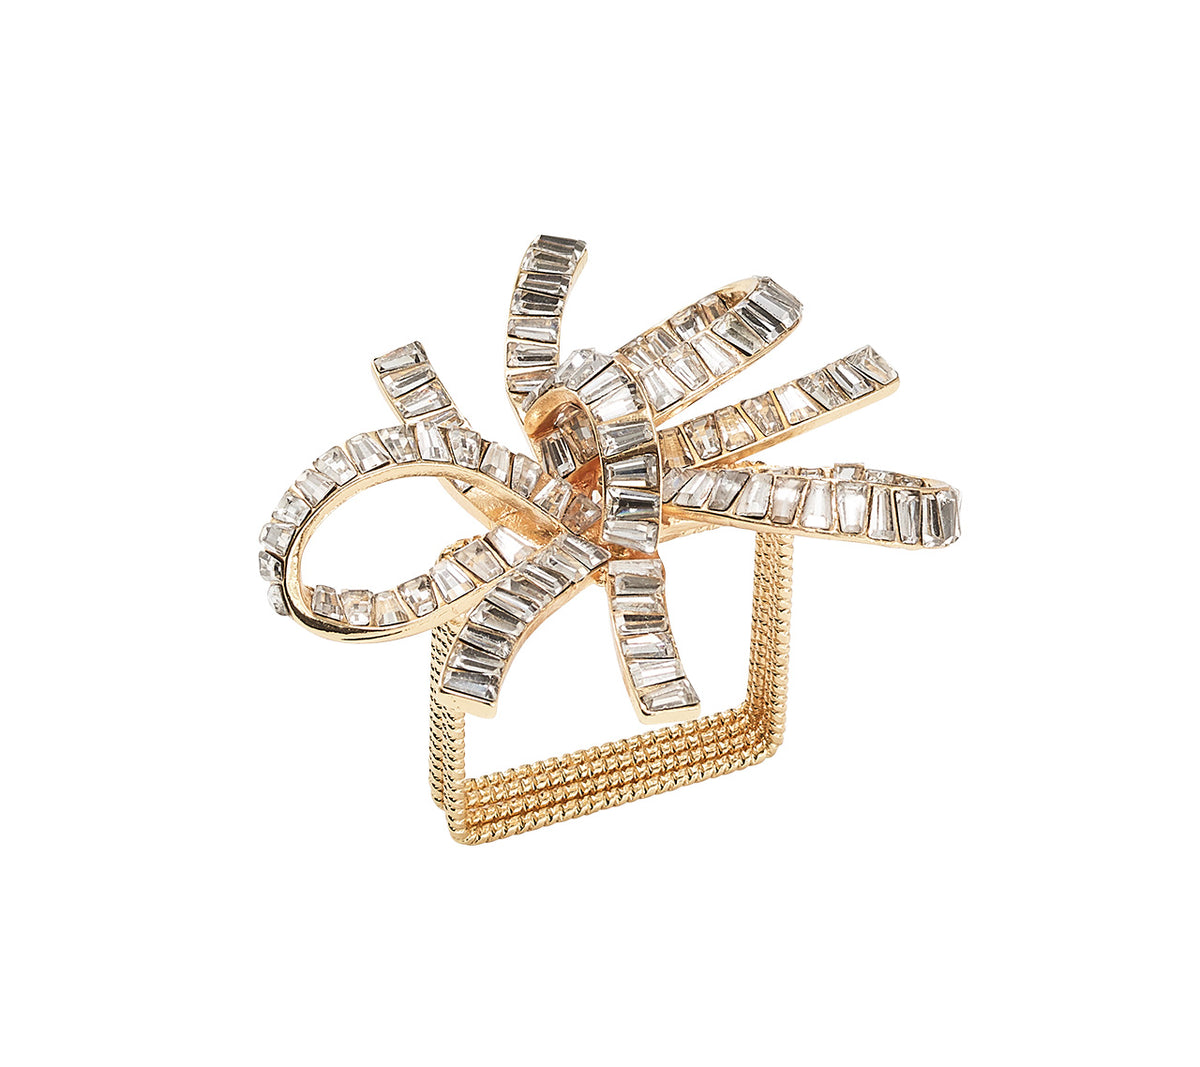 Kim Seybert Luxury Jeweled Bow Napkin Ring in Gold & Crystal in a Gift Box